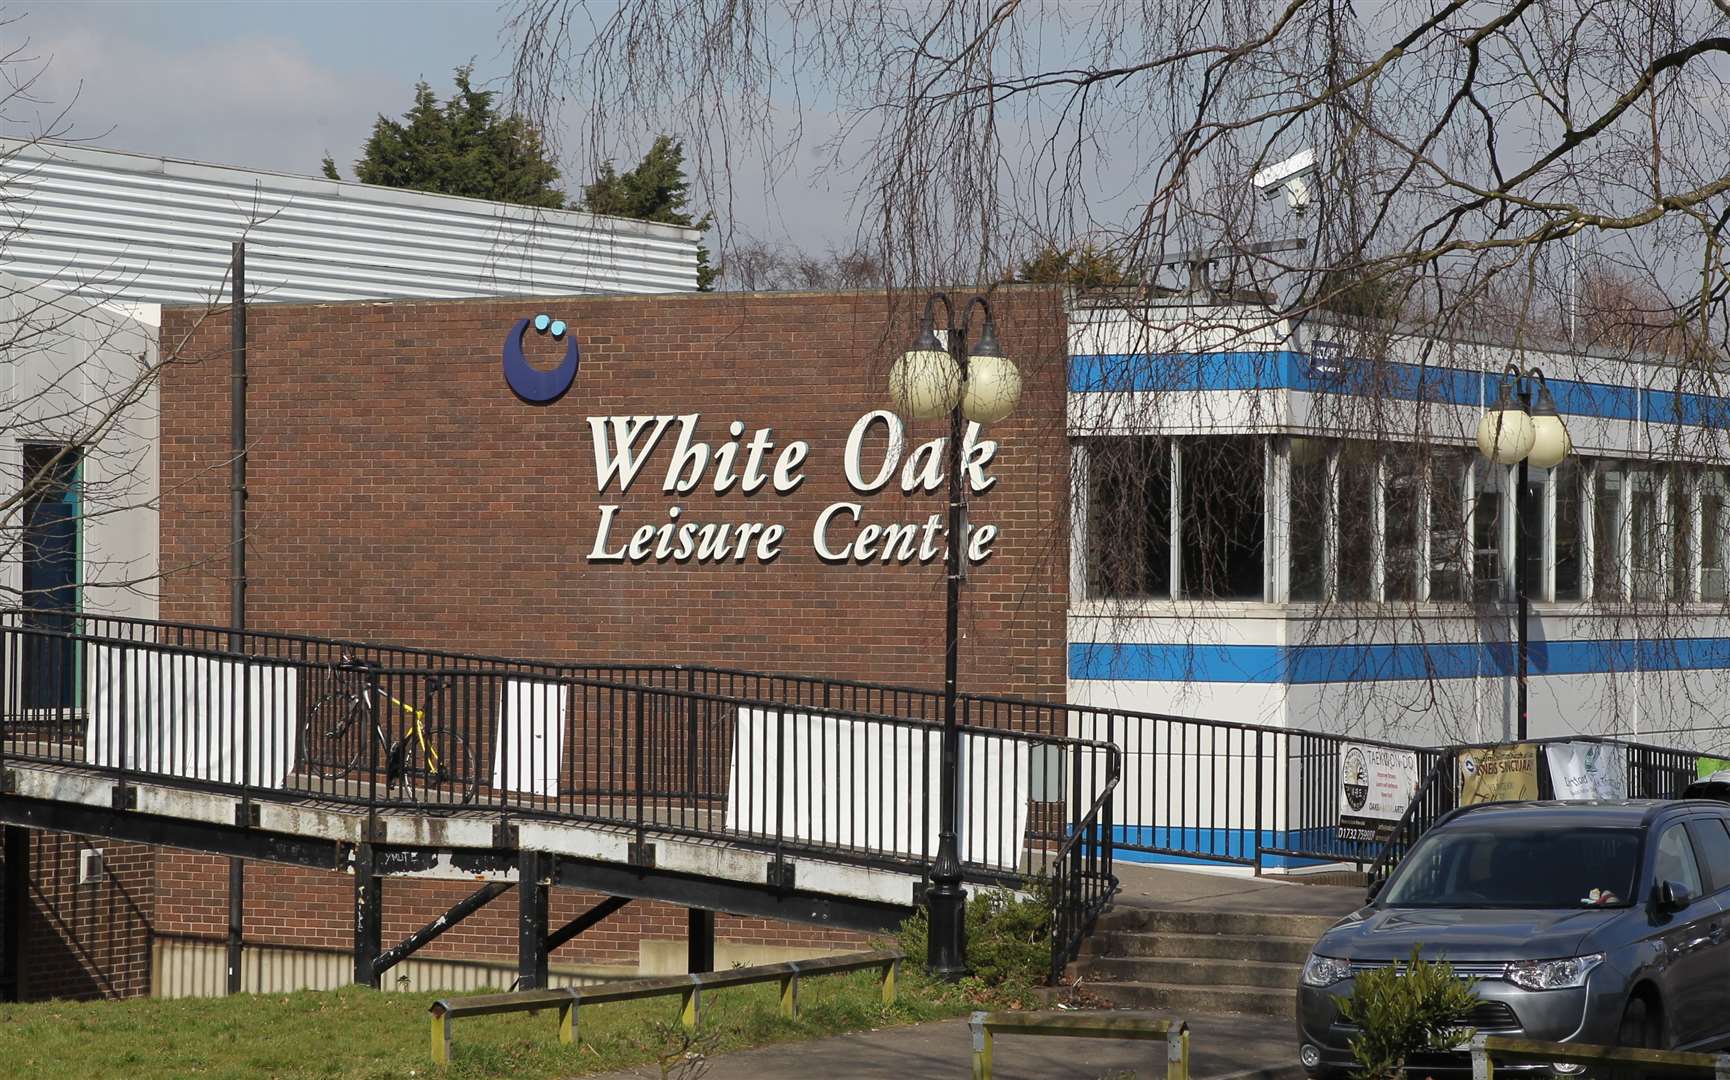 The White Oak Leisure Centre in Swanley. Picture: John Westhrop